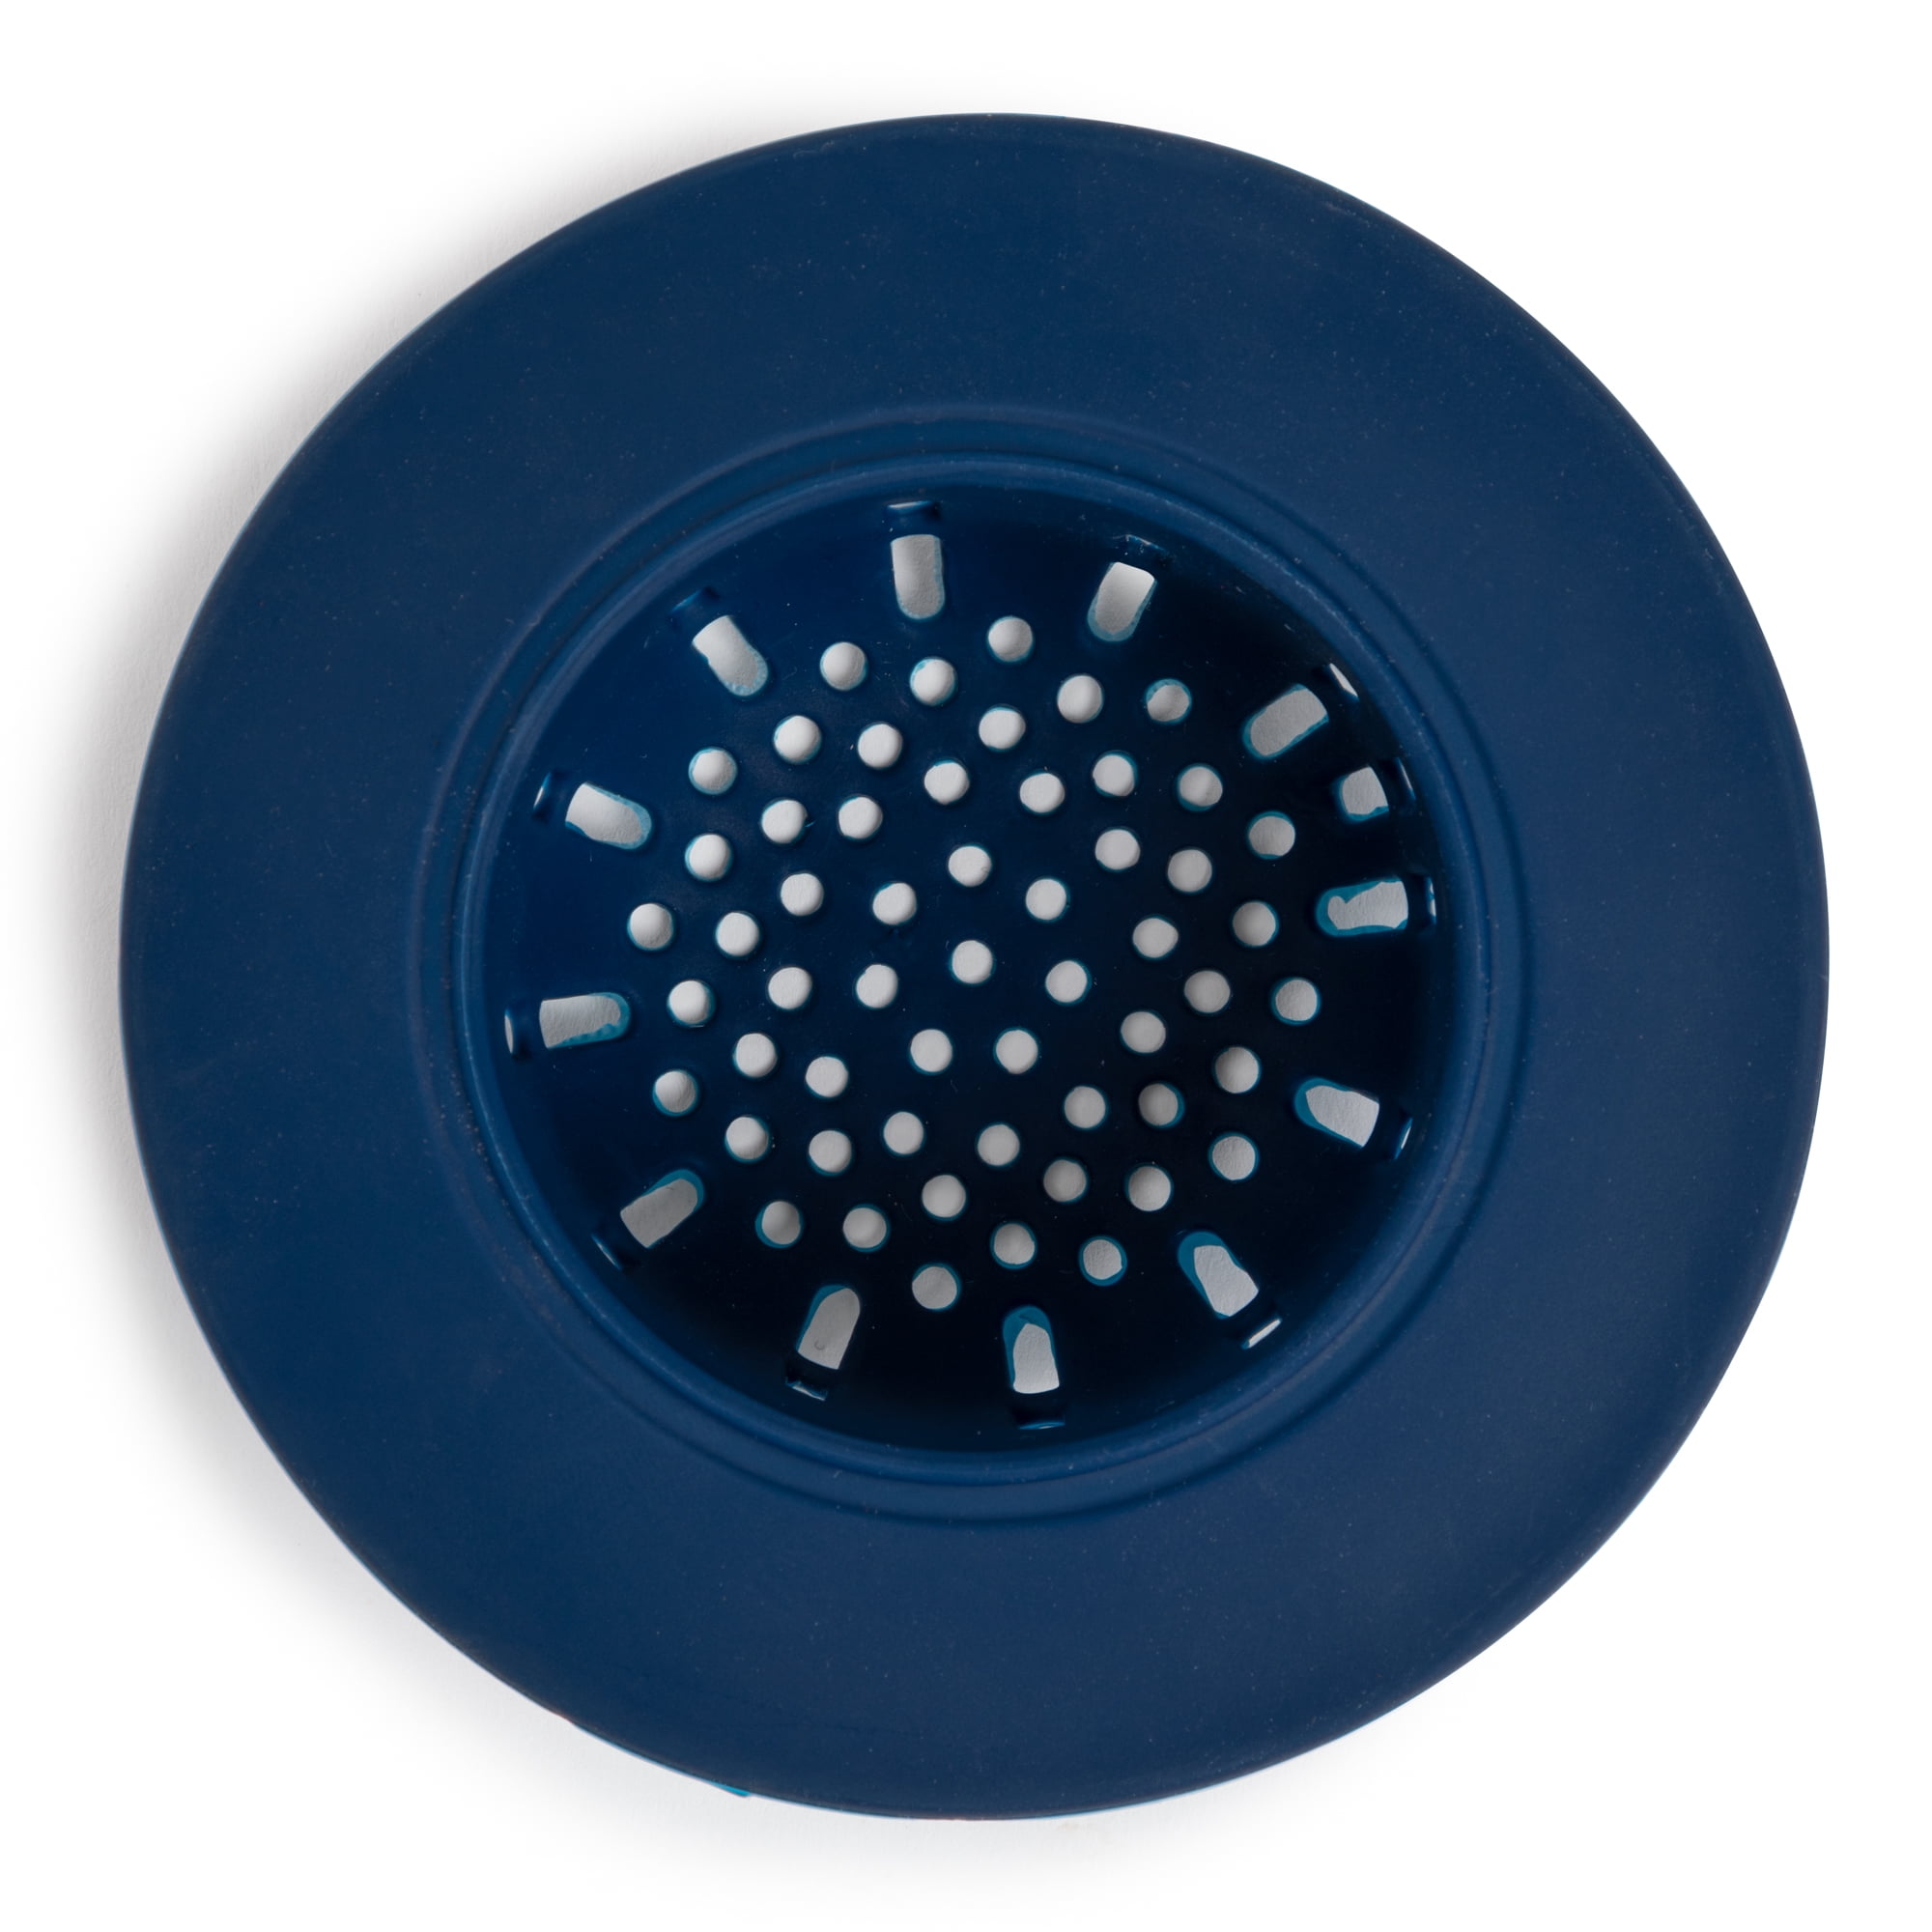 Food Safe Silicone Fits In Most Standard Sinks Blue TT0024C In-Sink Strainer